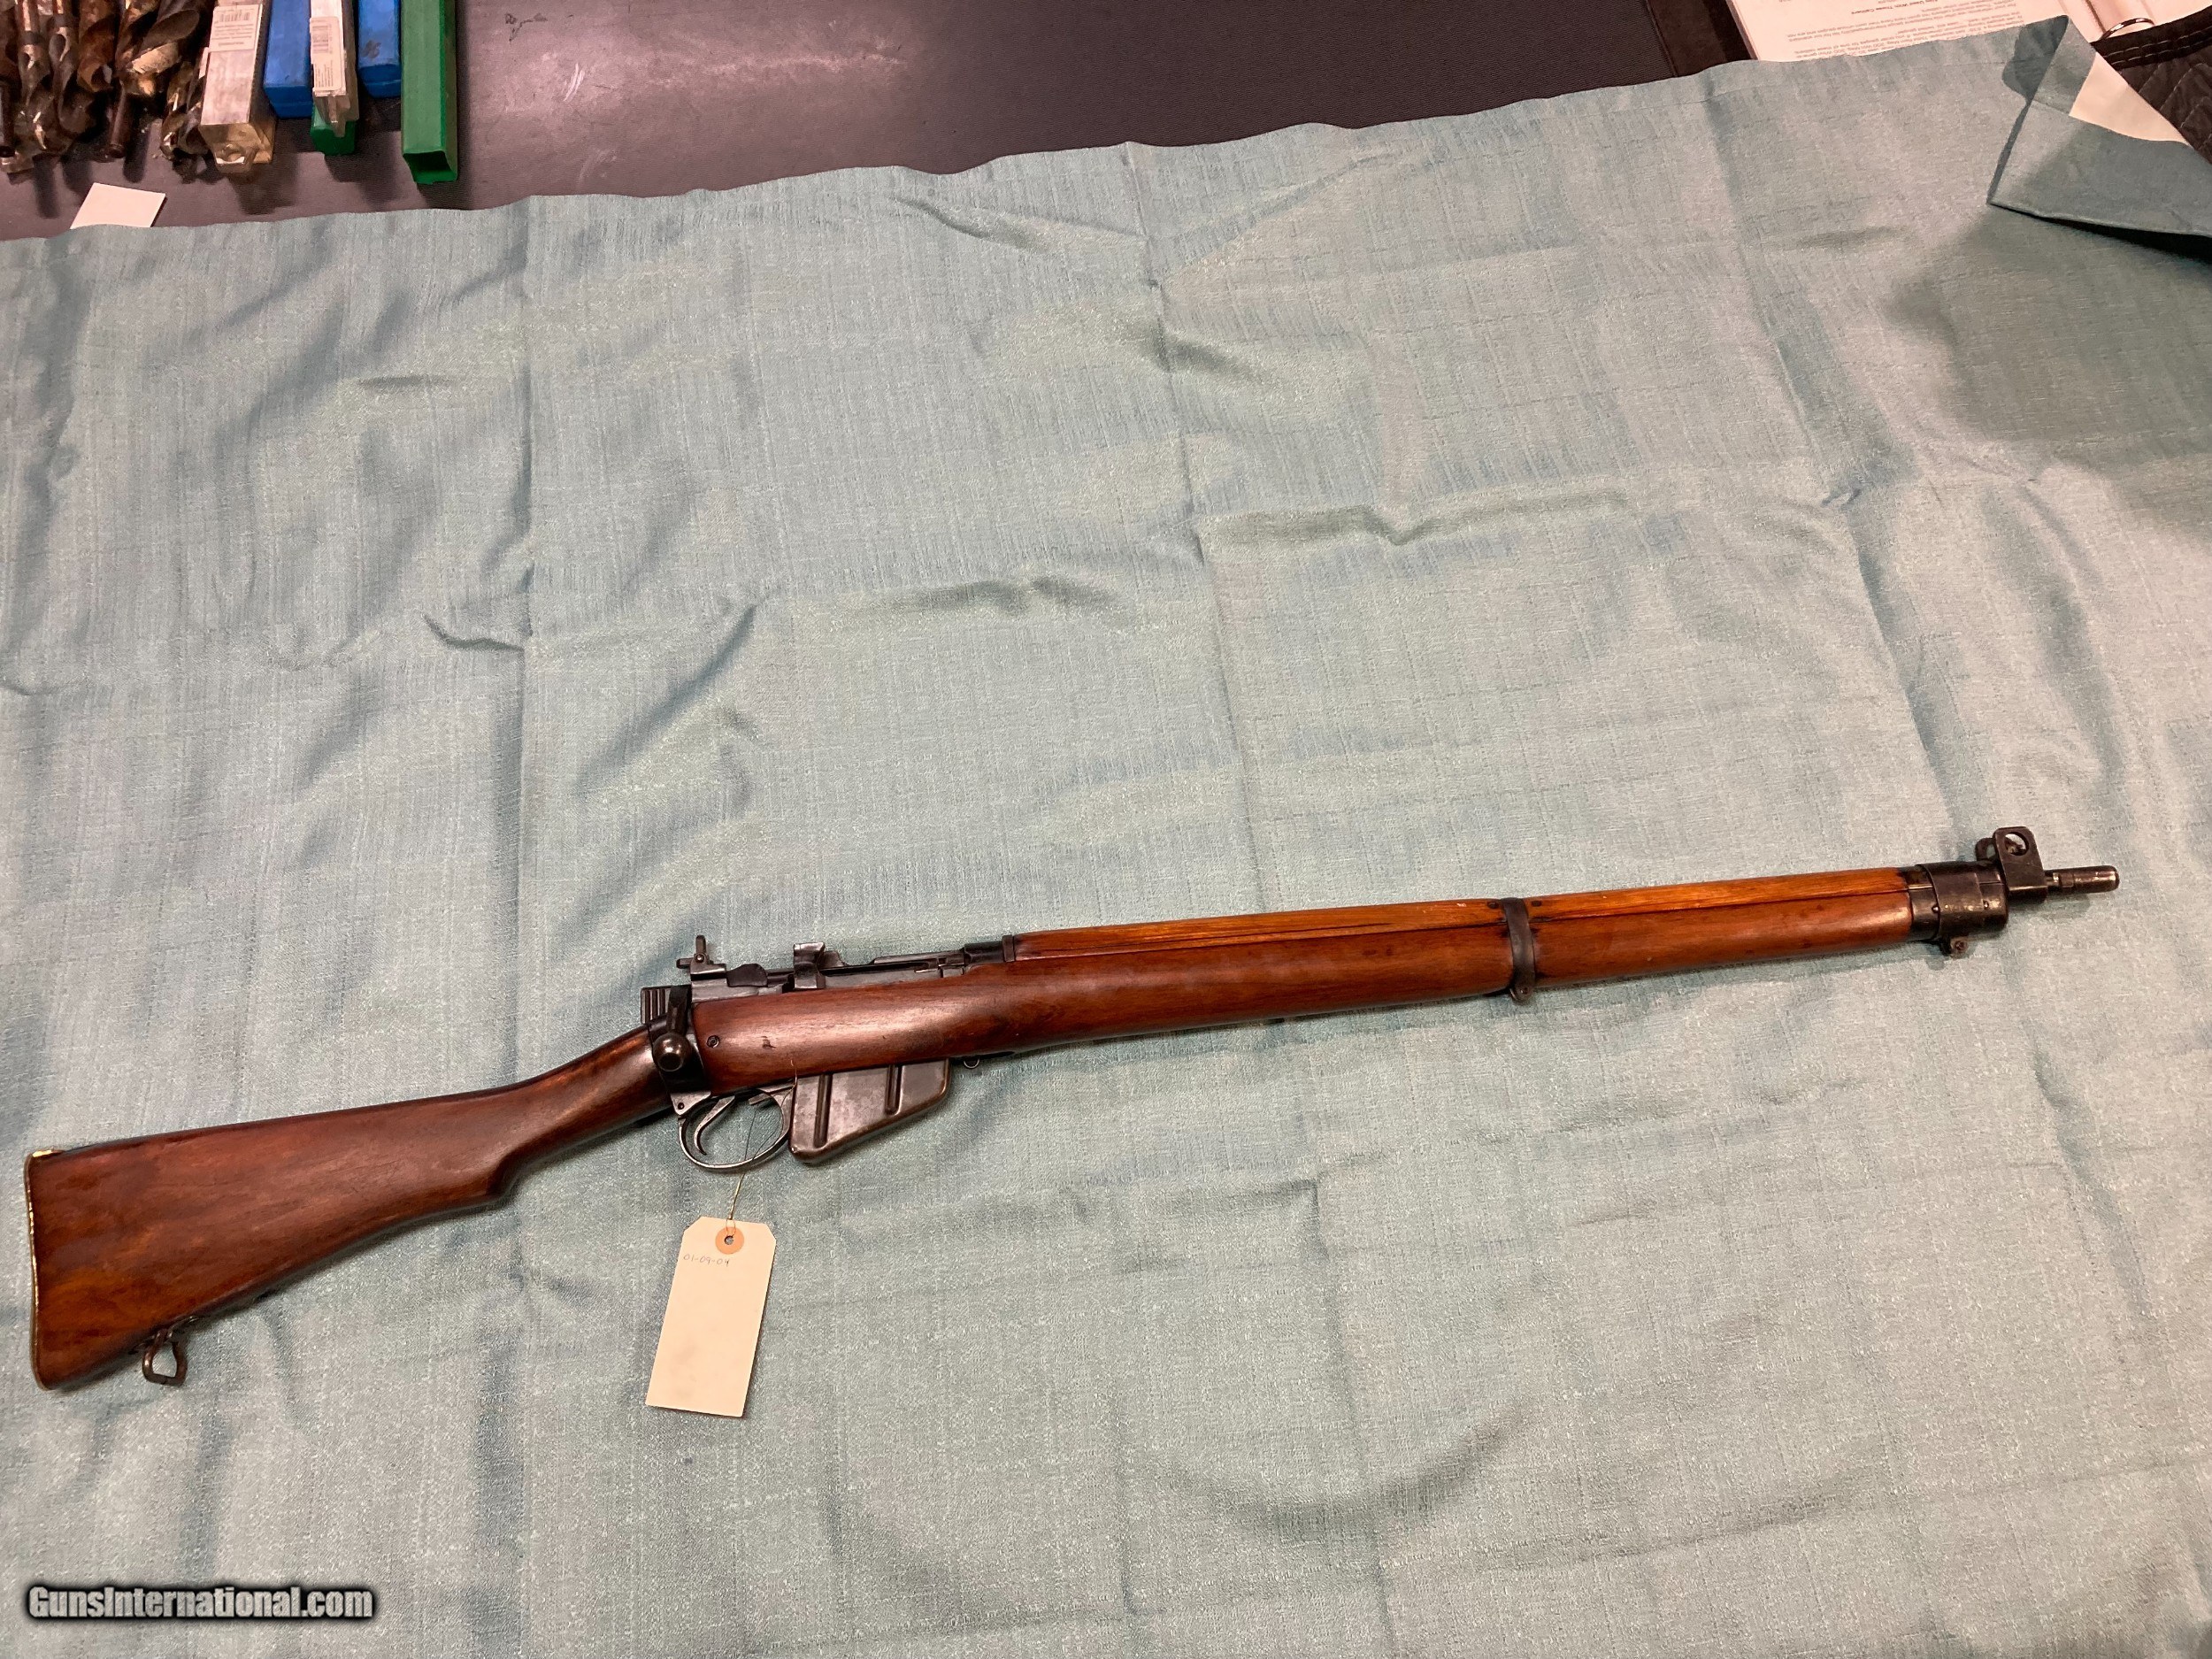 British LEE-ENFIELD No4 Mk 1 Sporterized 303 sold at auction on